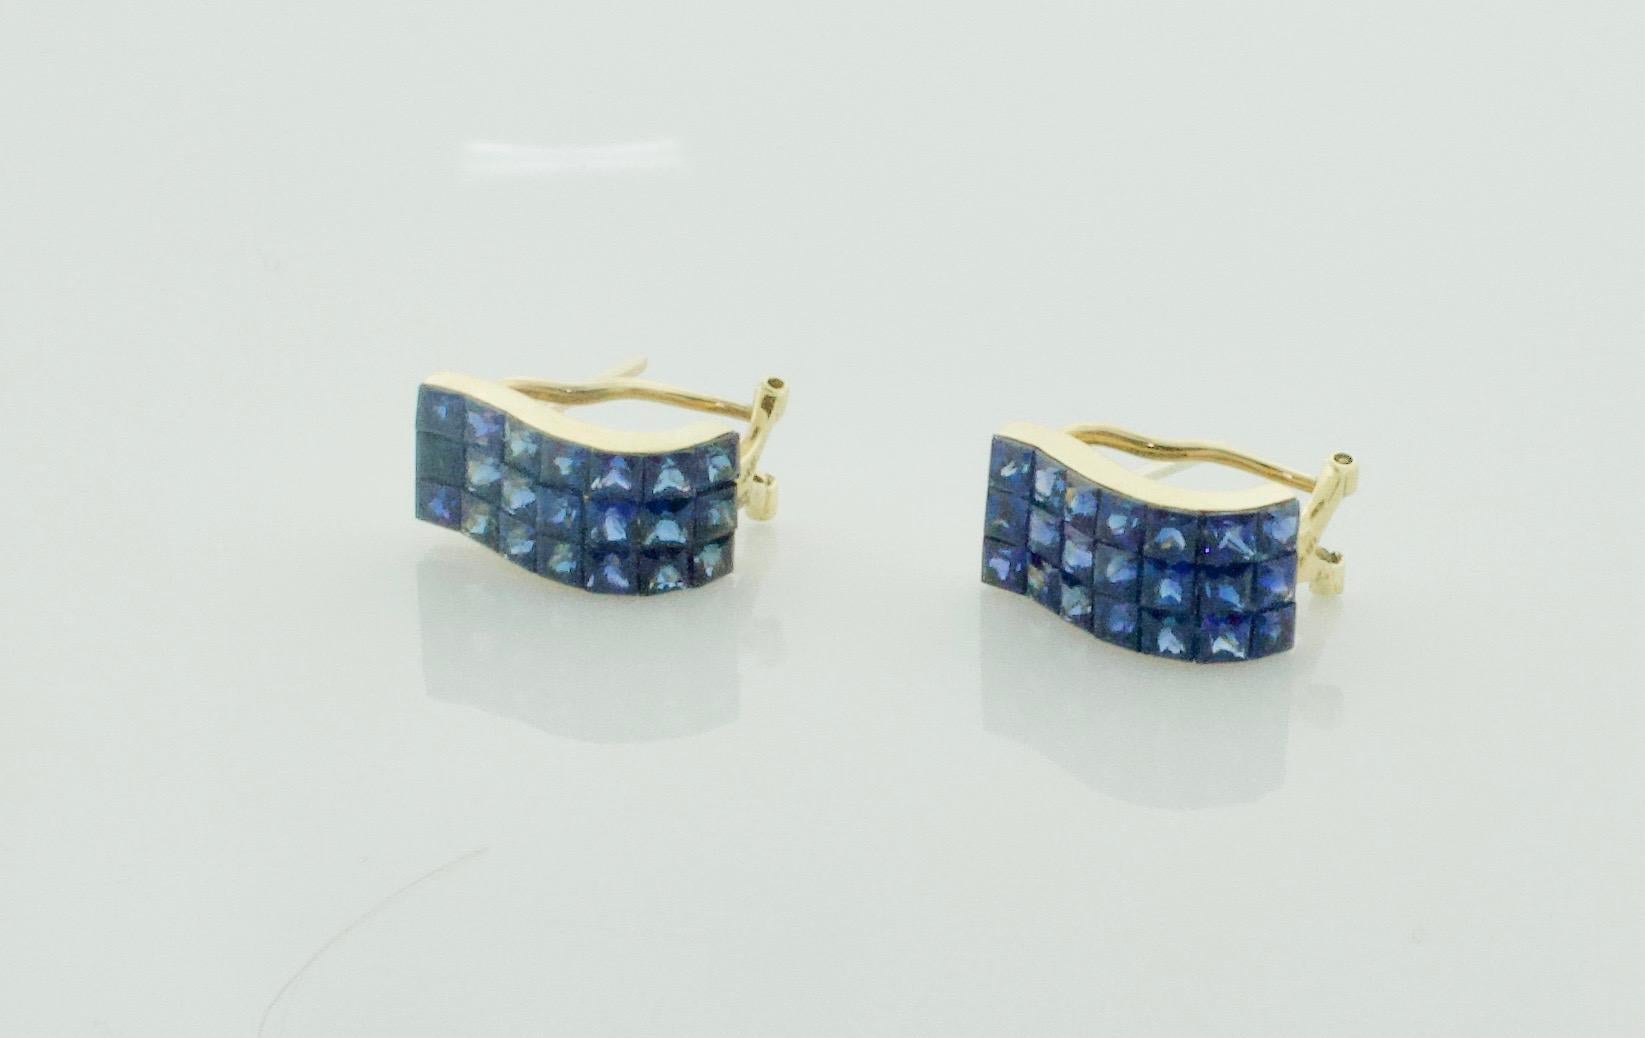 Invisibly Set Sapphire Earrings in 18k Yellow Gold In Excellent Condition For Sale In Wailea, HI